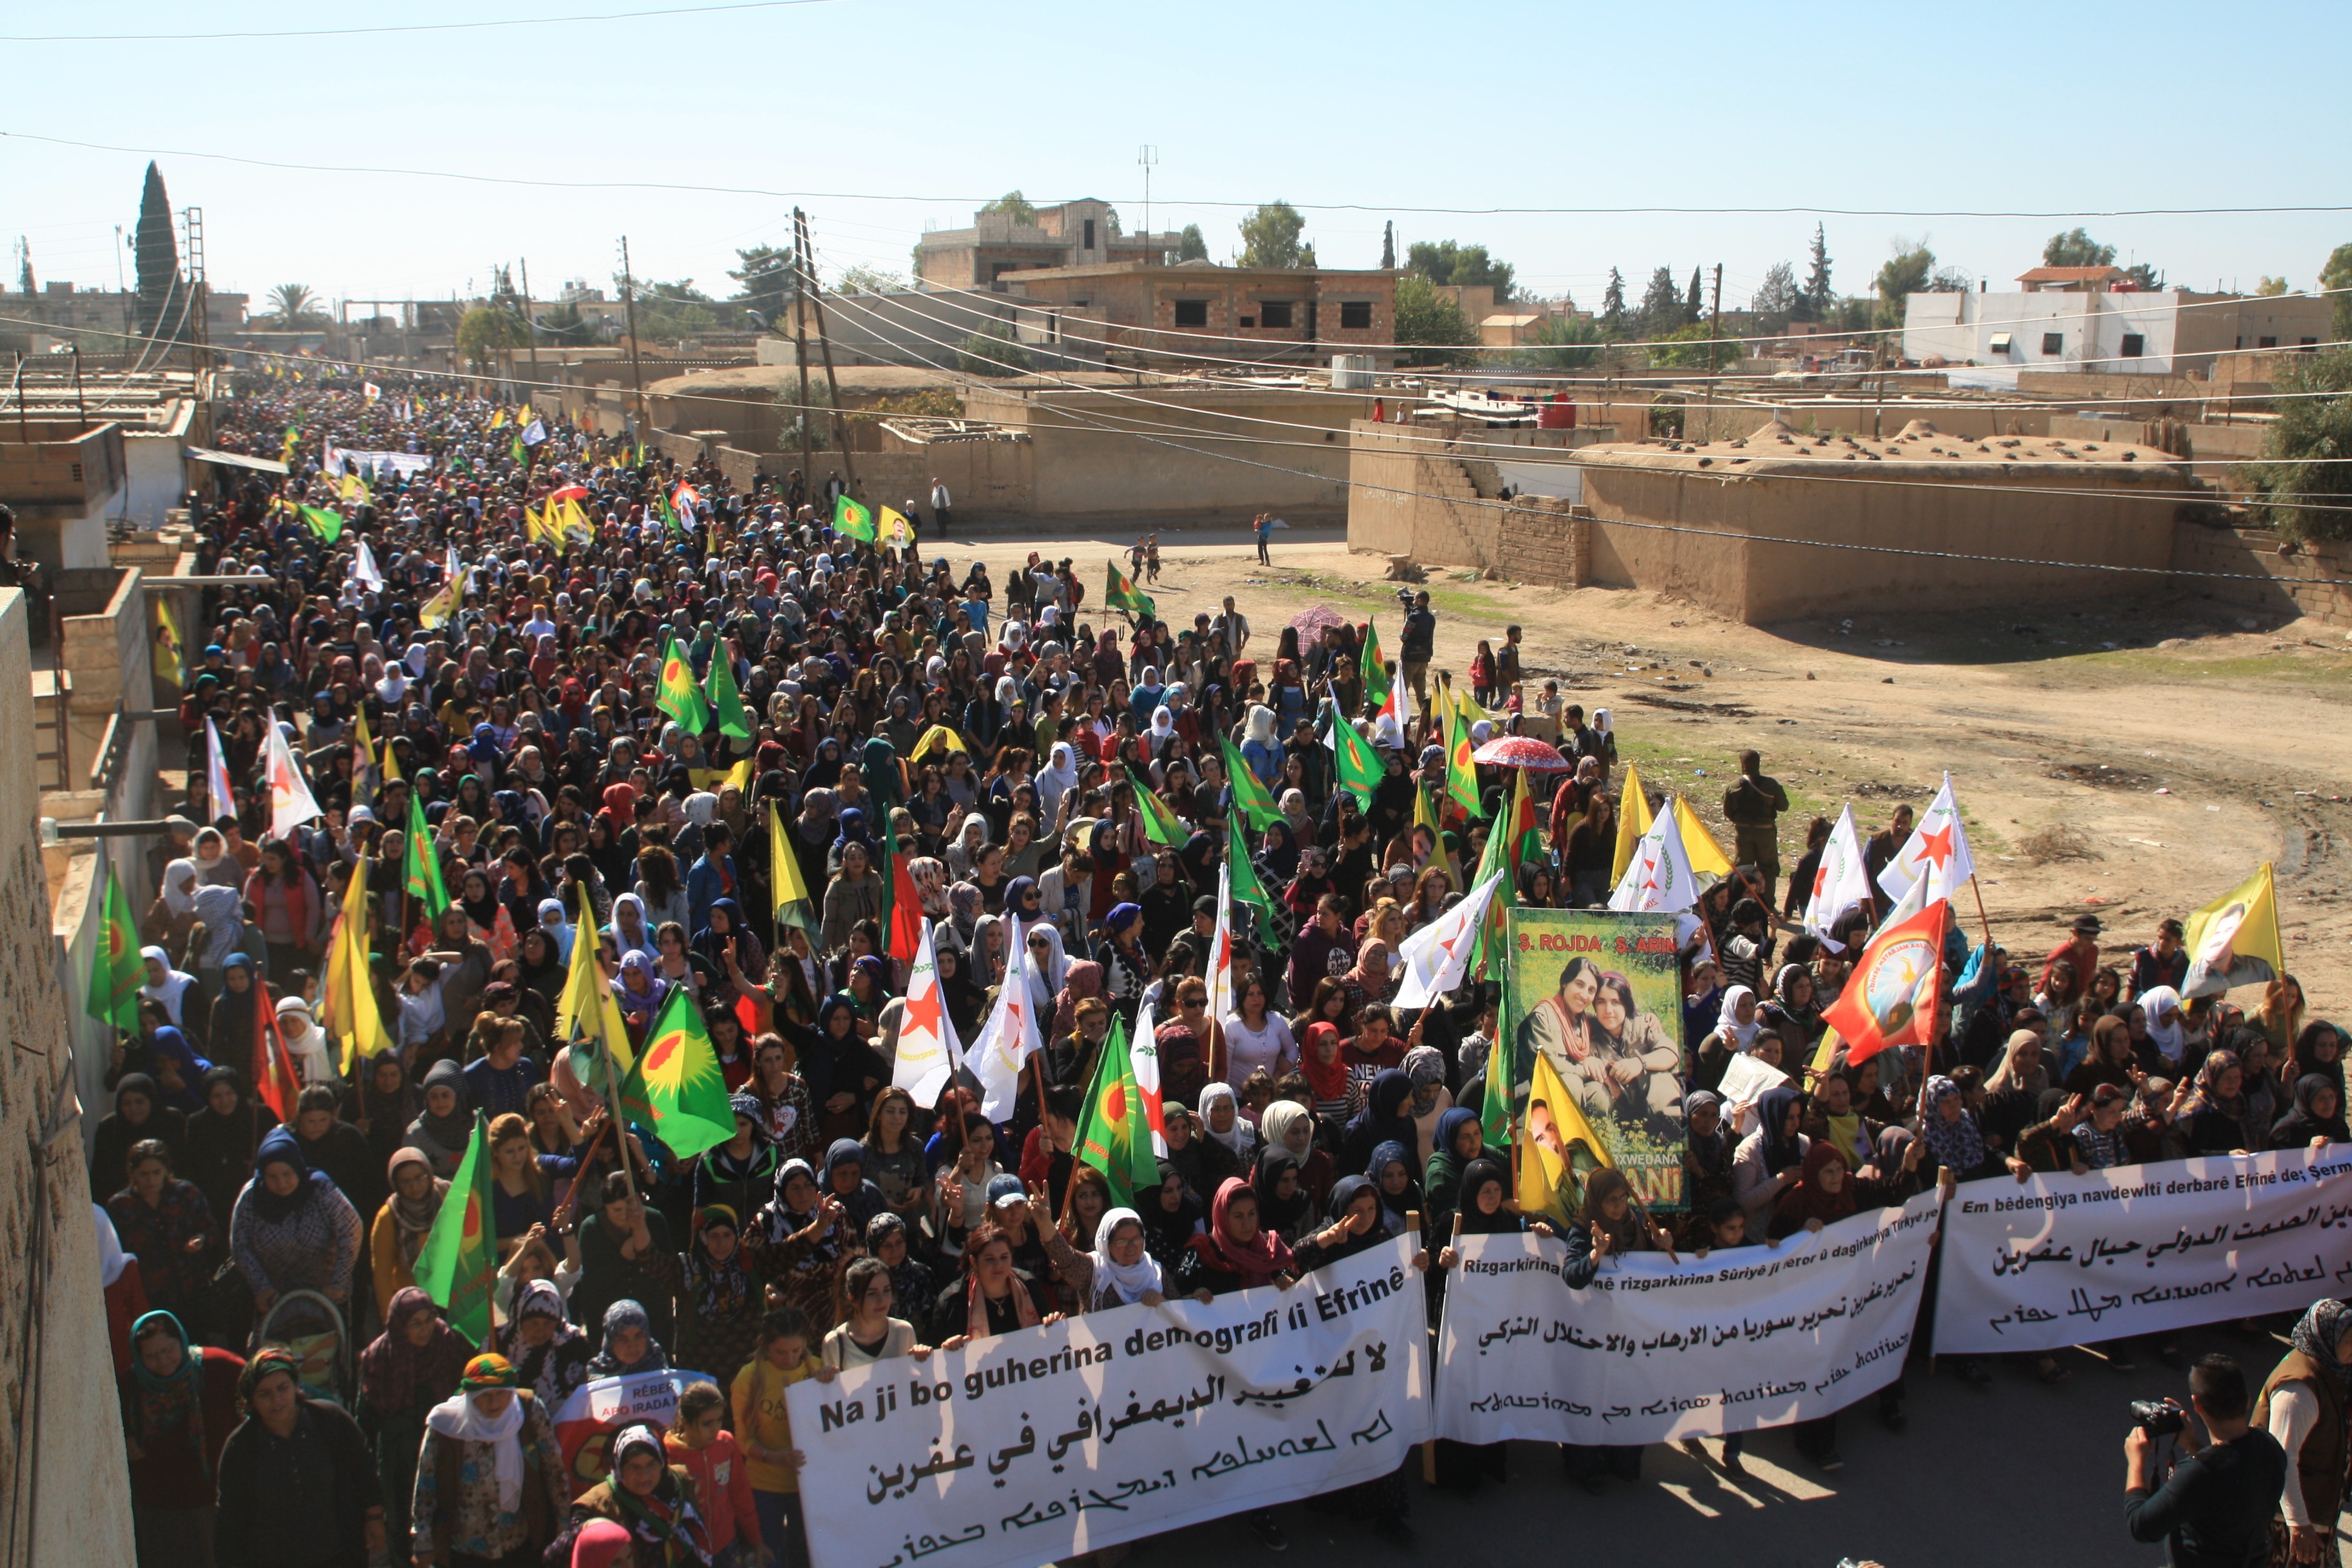 With the spirit of the fight of Kobane we will win the international struggle for liberation